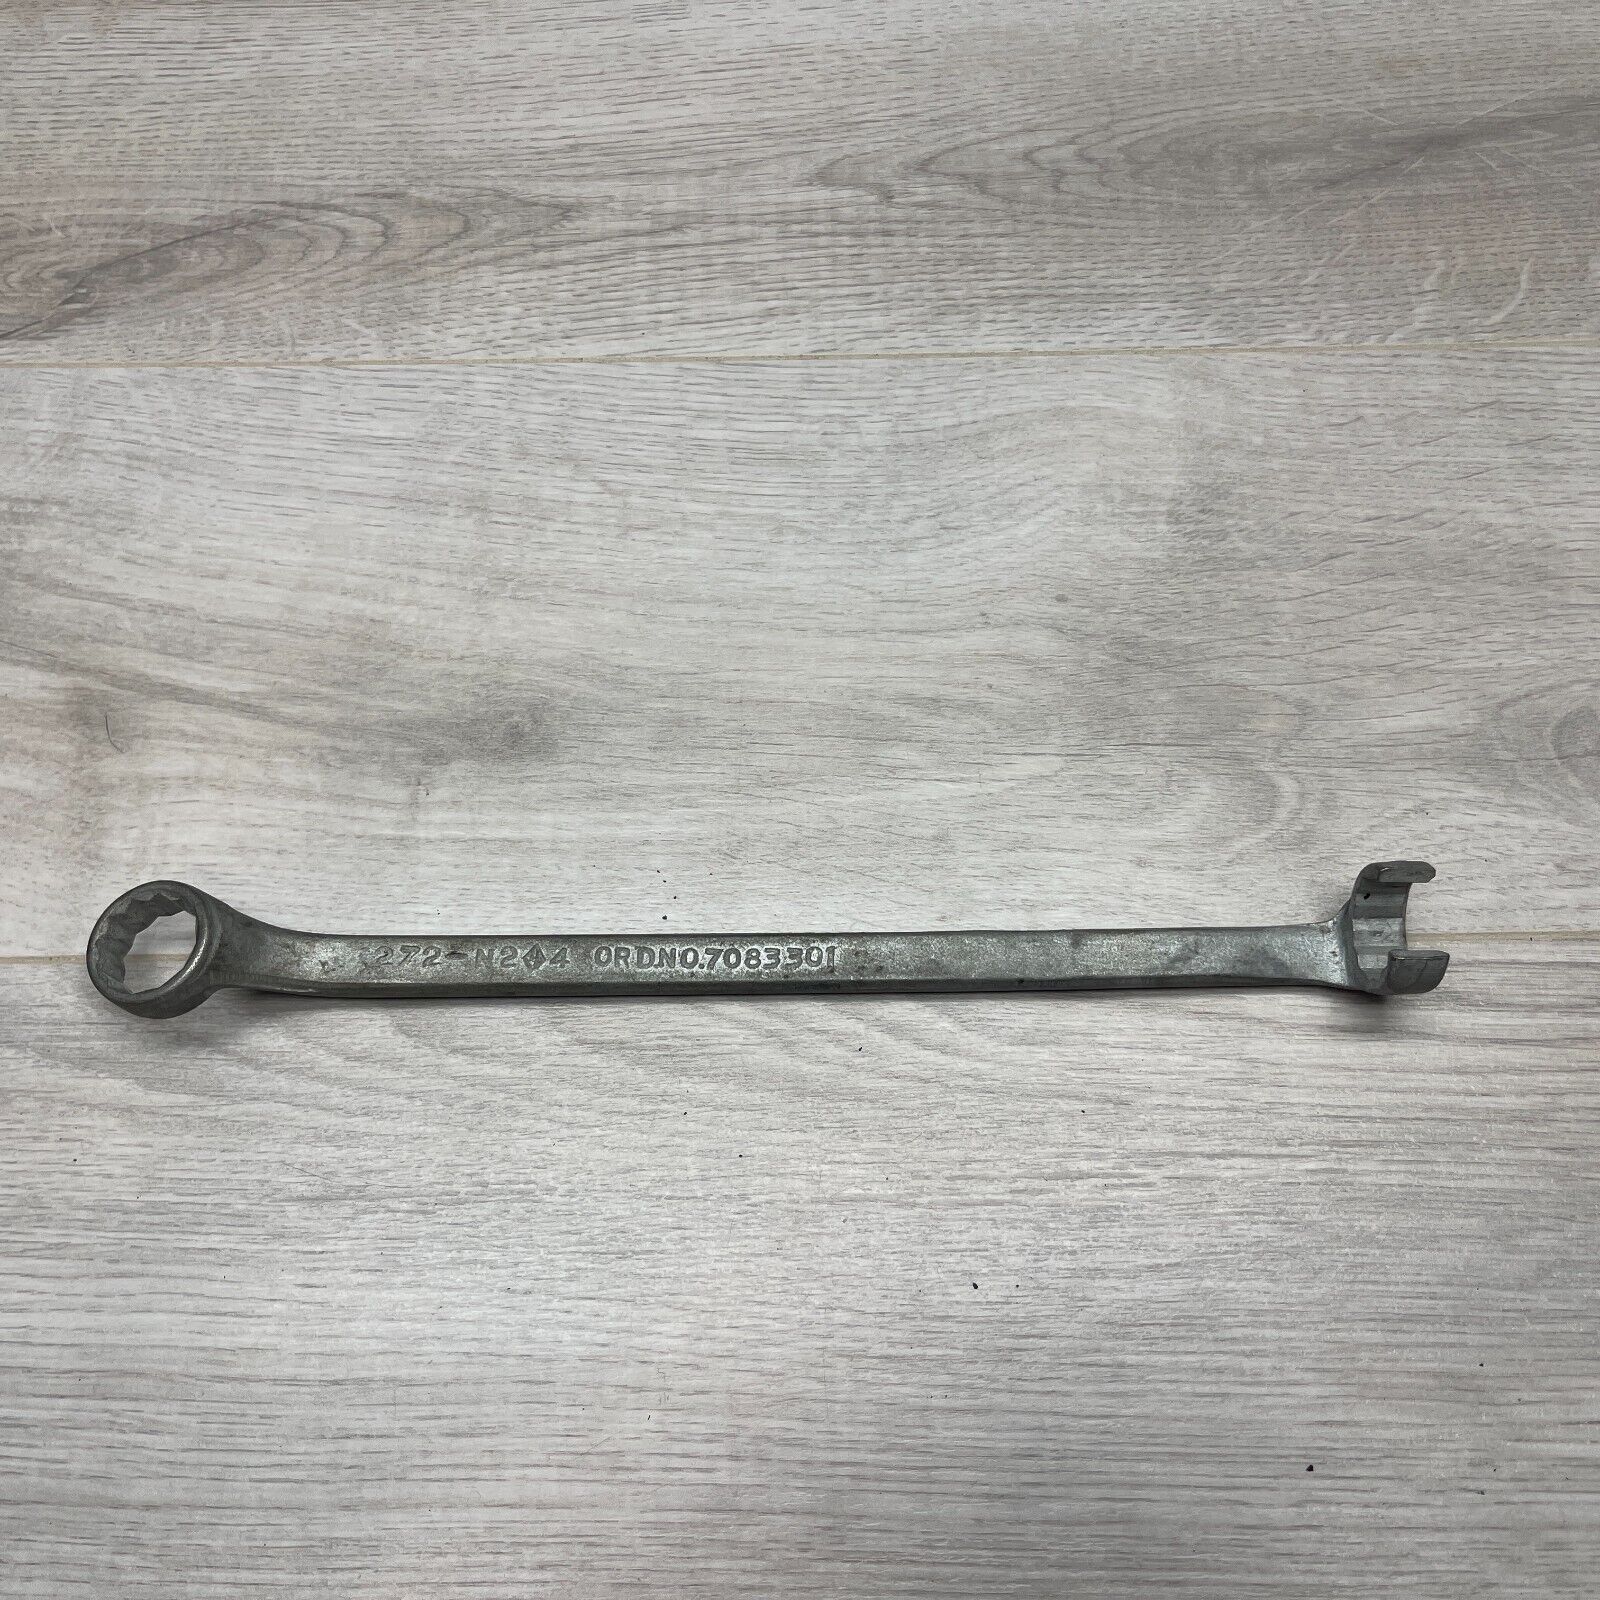 Antique Herbrand  ¾” Box Flare Wrench Ordinance No. 7083301 Military 1272-N2 4